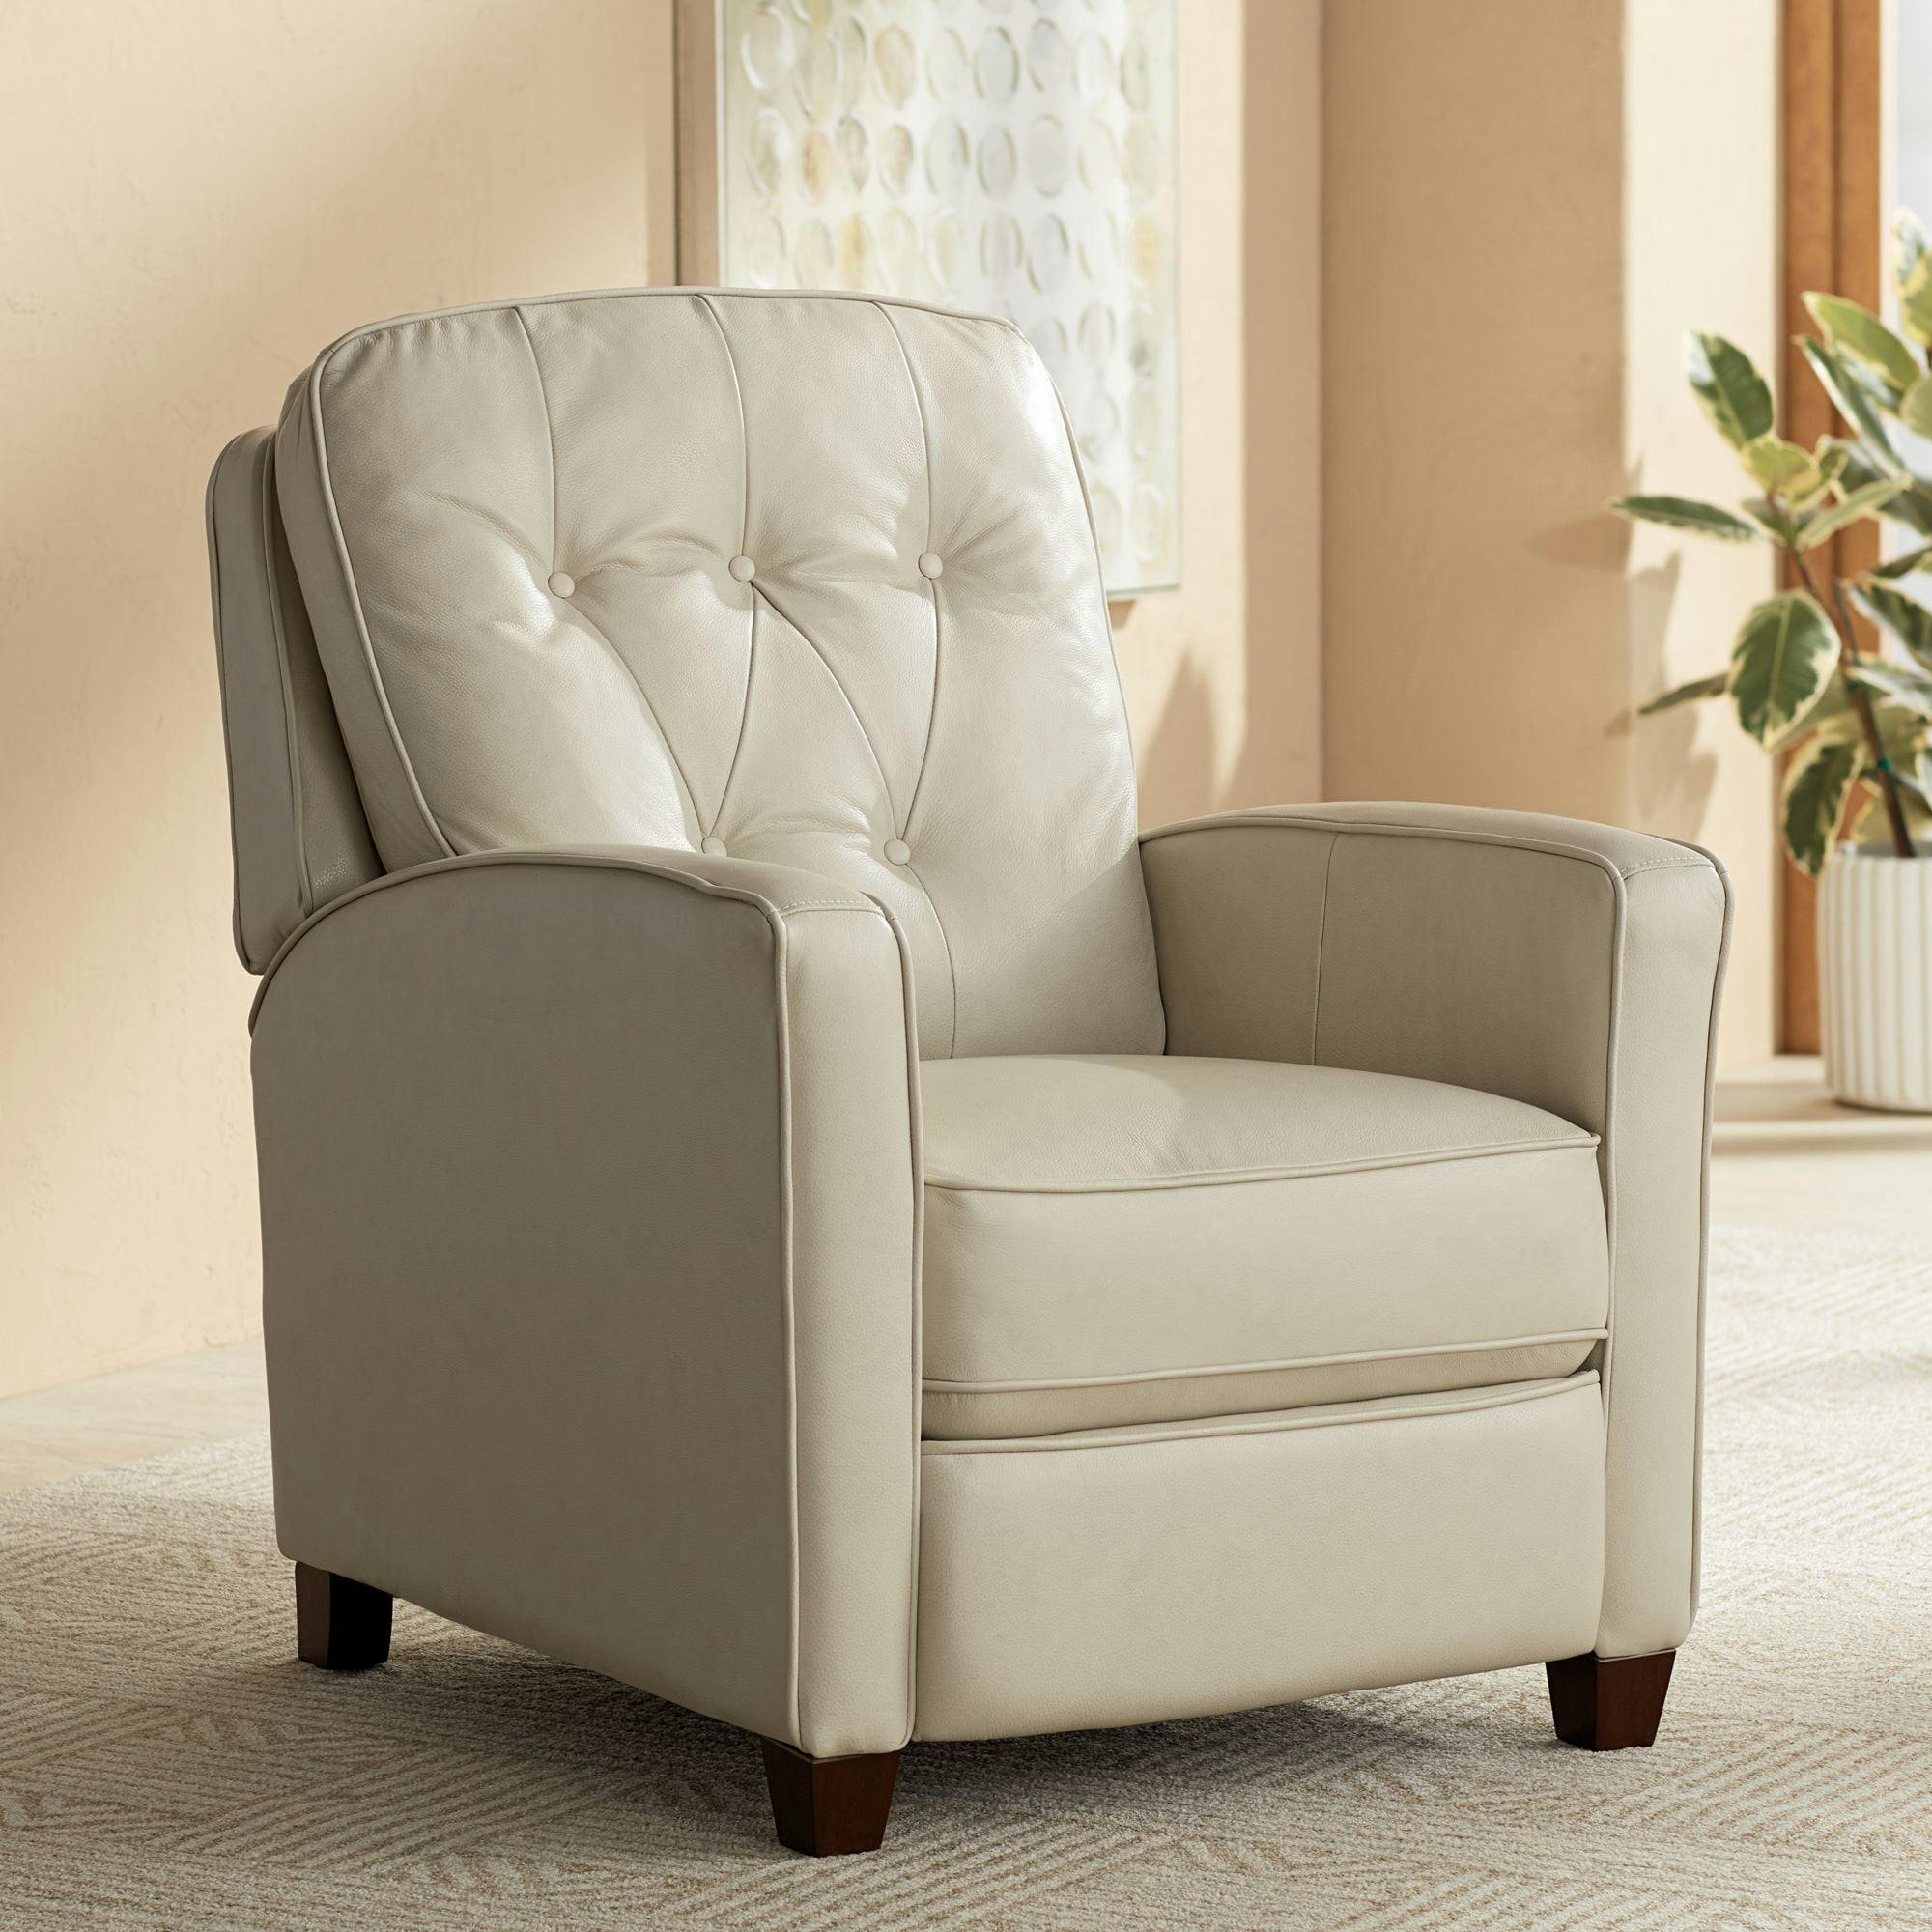 Livorno Pearl Leather Push Recliner Chair in Modern Style